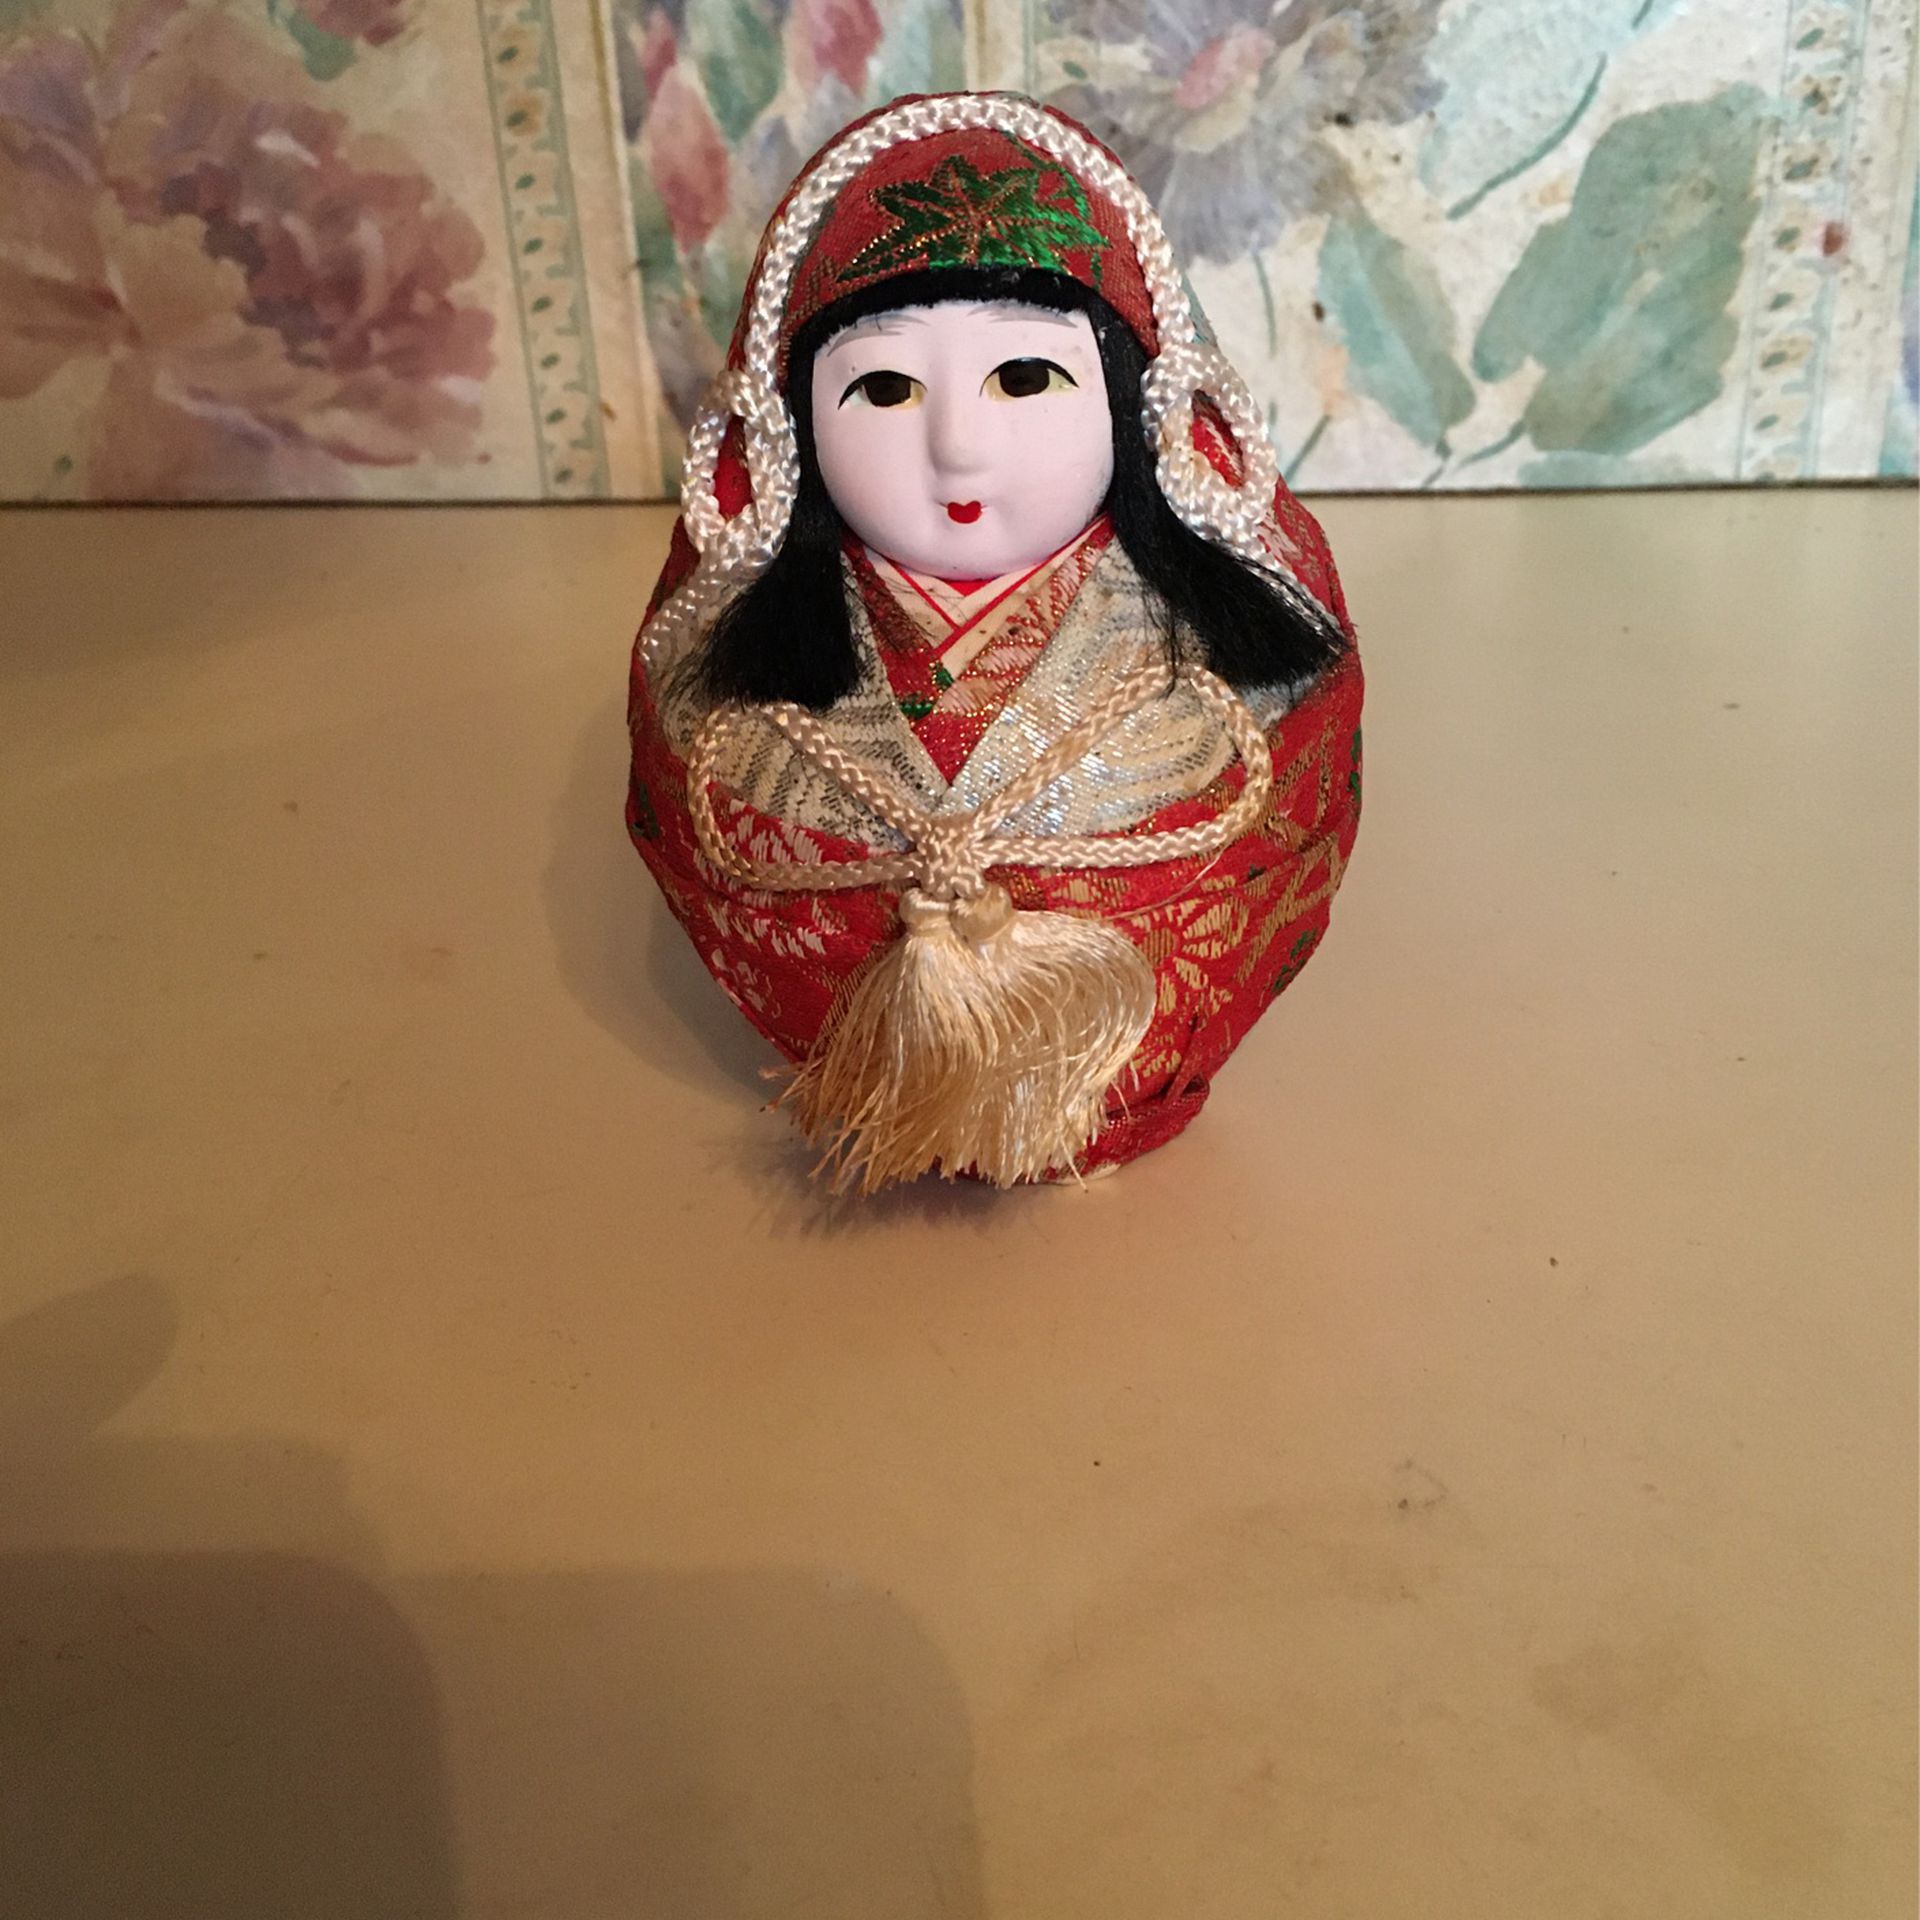  Japanese doll5  inches tall about 3 inches wide